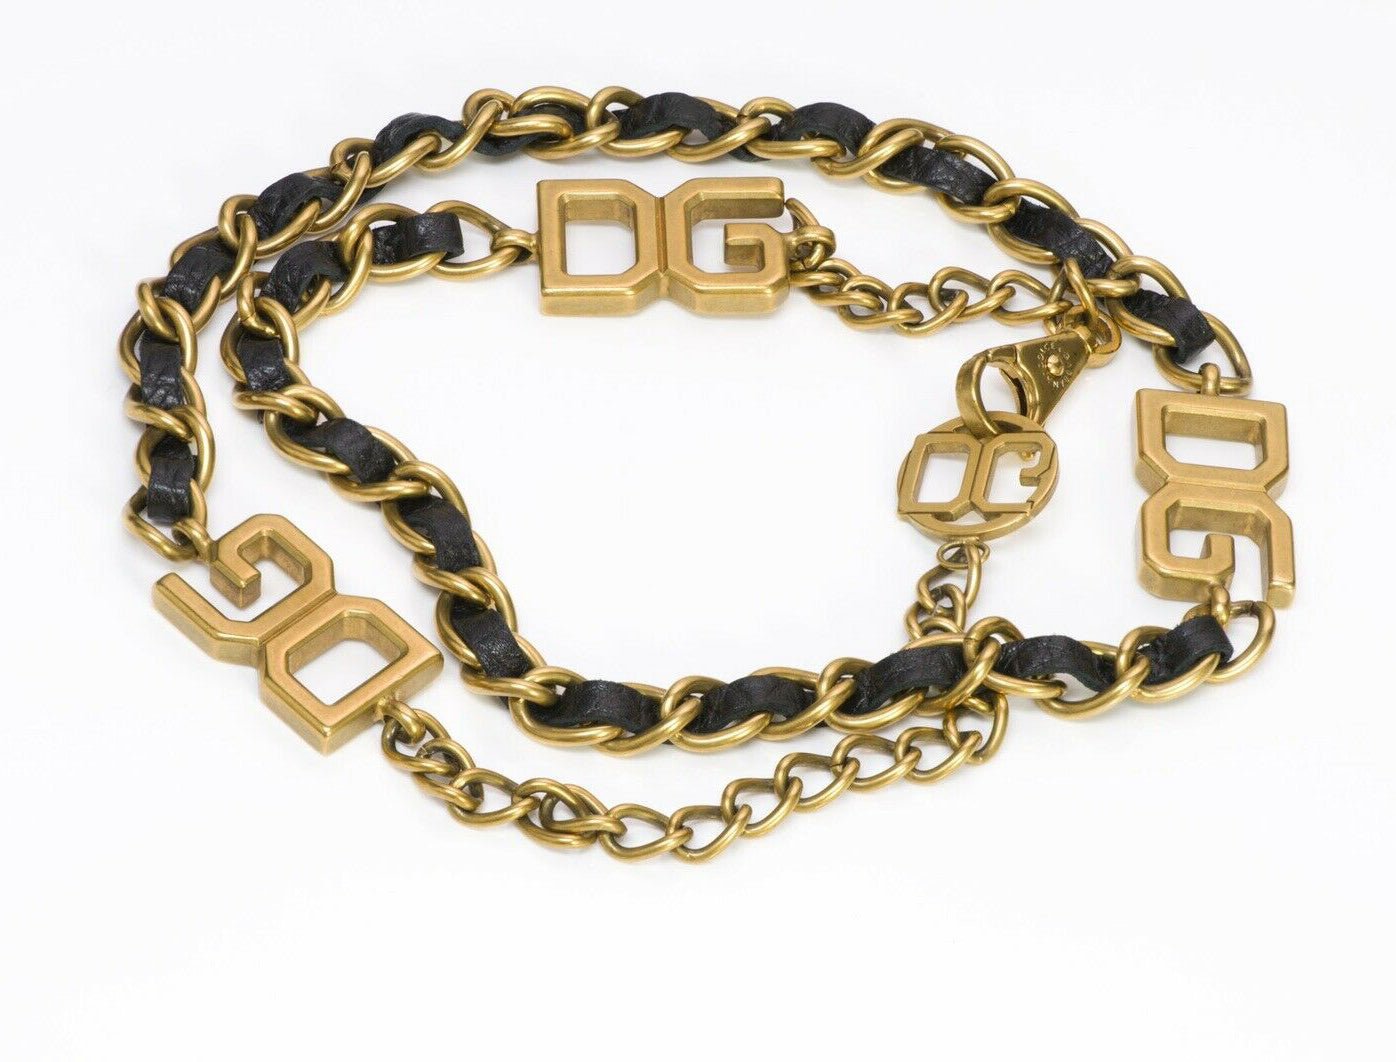 Dolce Gabbana D&G Black Leather Gold Tone Metal Chain Belt - DSF Antique Jewelry